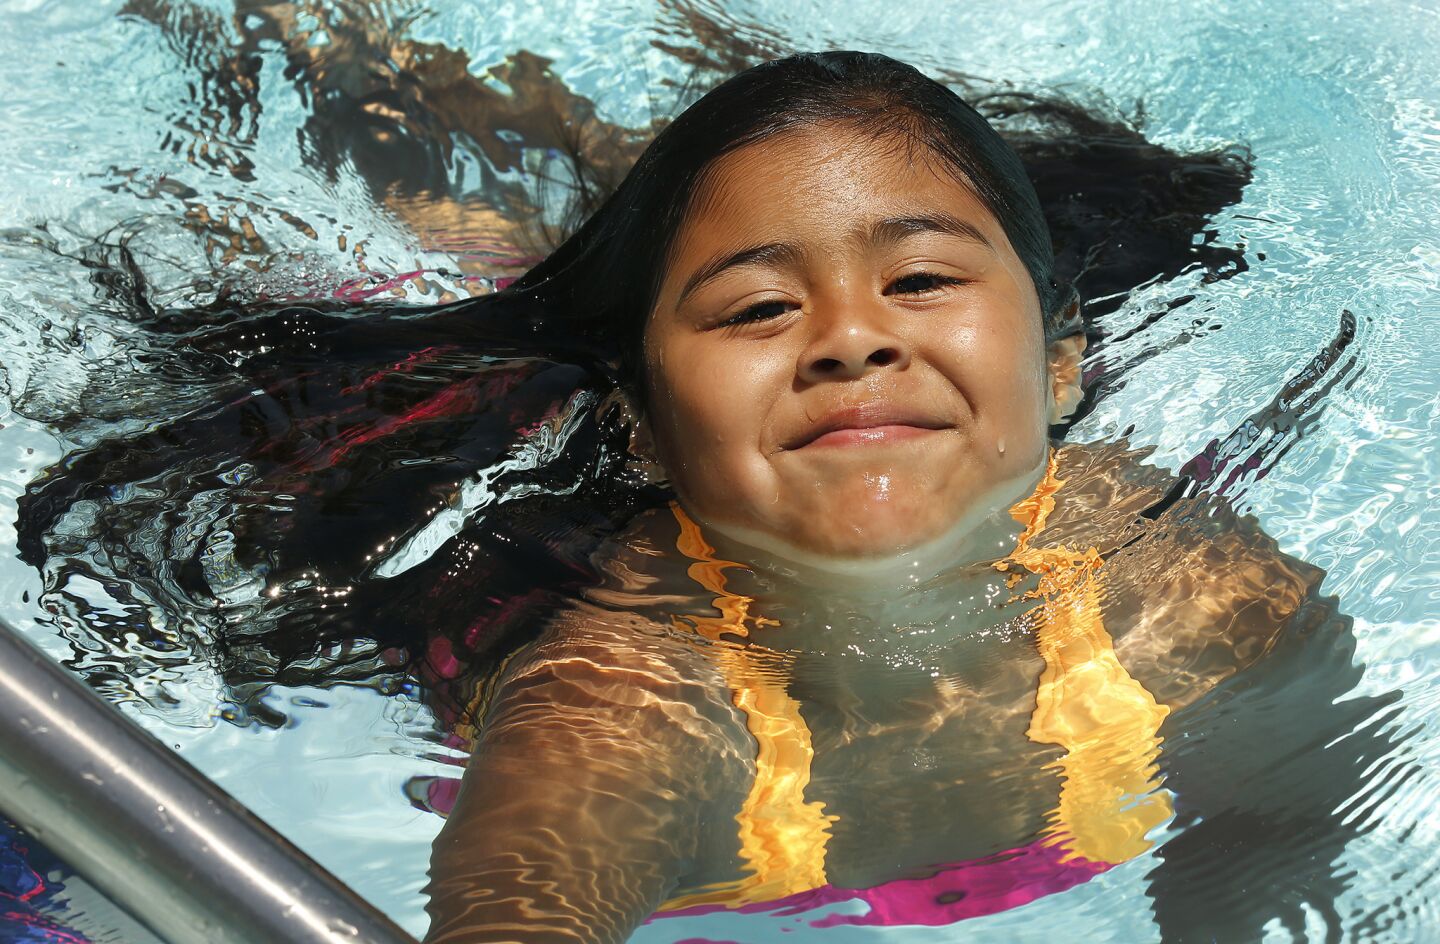 Melissa Garcia, 6, cools off in the Reseda Park pool in the San Fernando Valley on Friday afternoon.